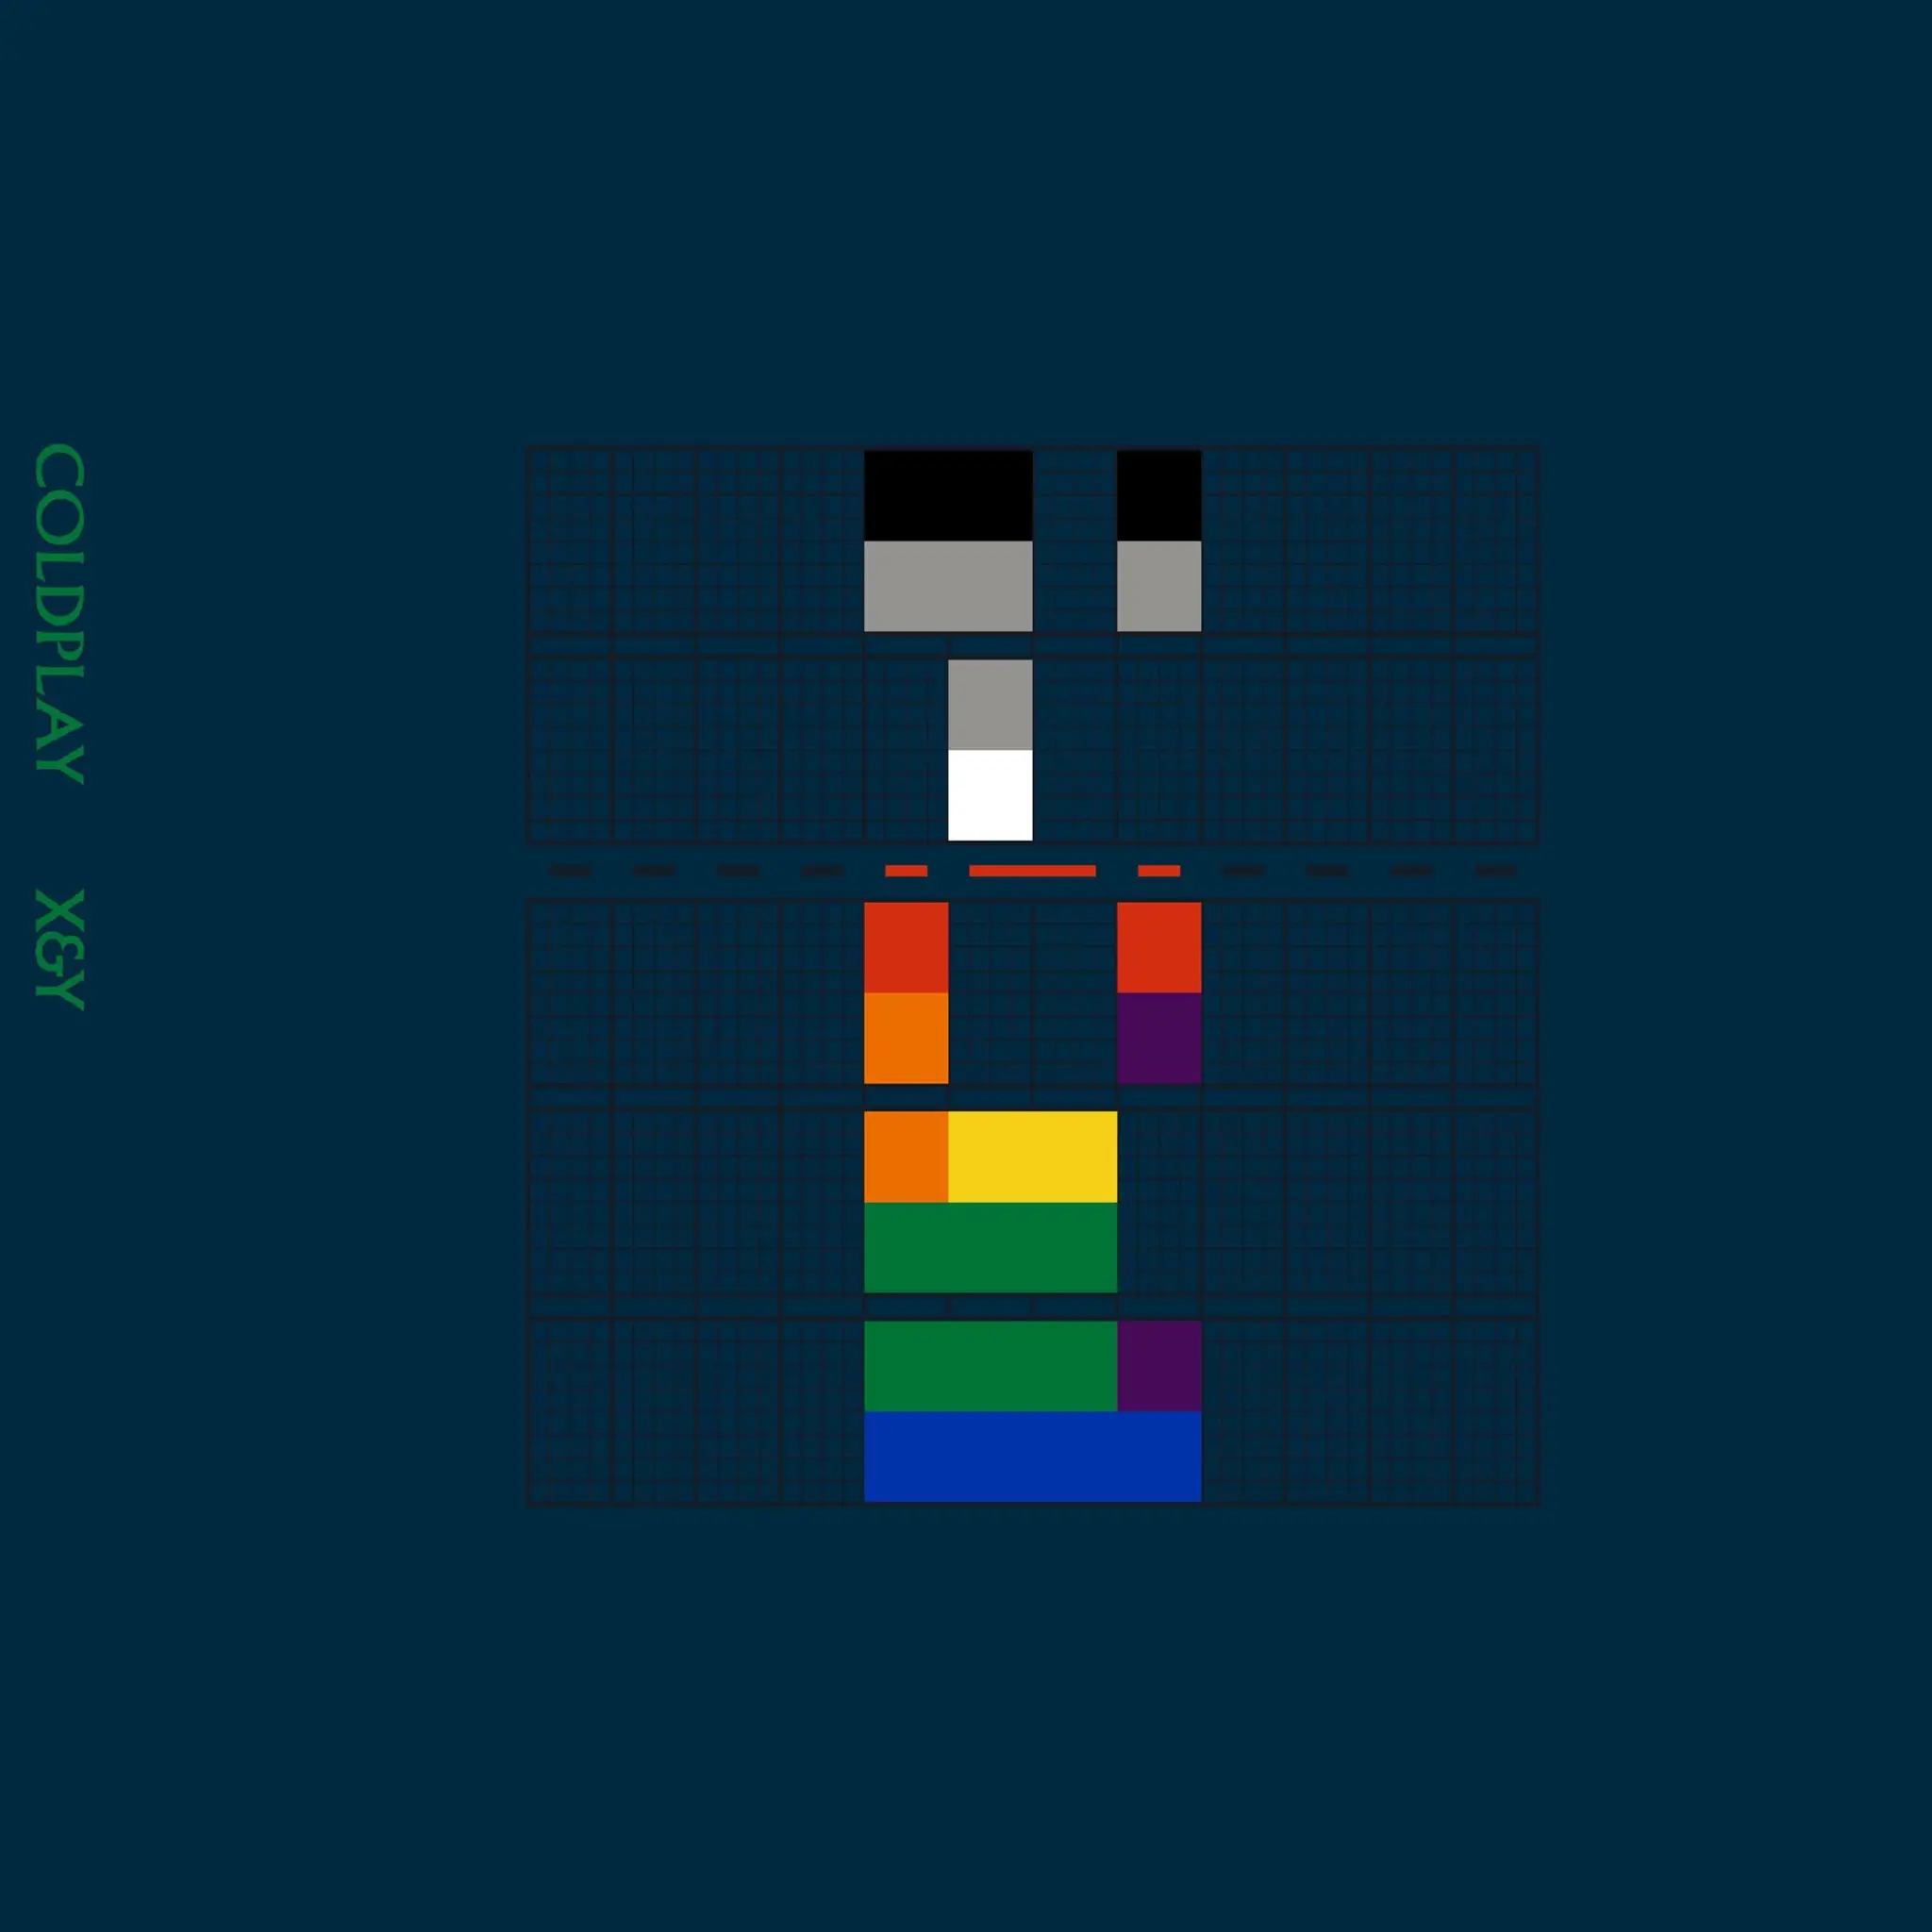 <strong>Coldplay - X&Y</strong> (Vinyl LP - black)